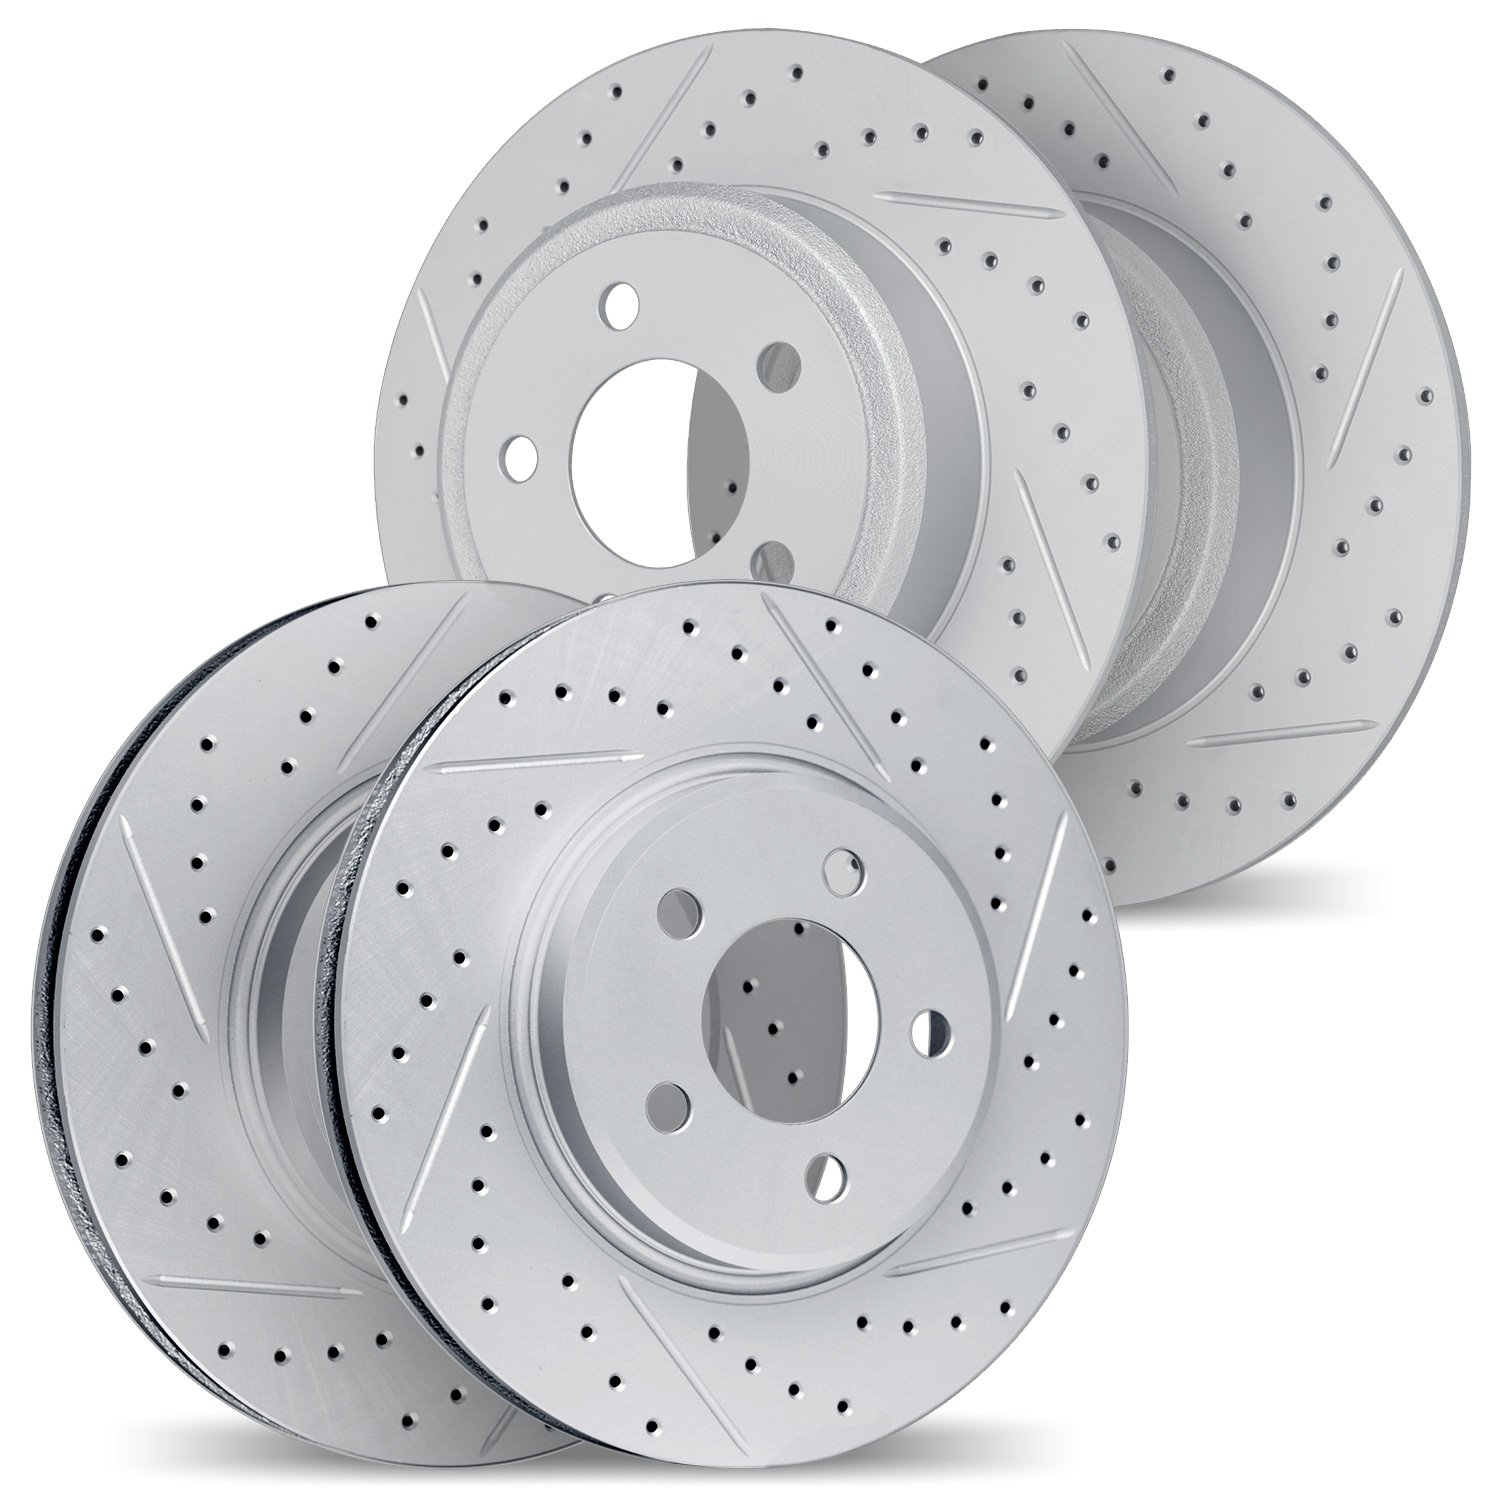 2004-39003 Geoperformance Drilled/Slotted Brake Rotors, 2015-2017 Mopar, Position: Front and Rear